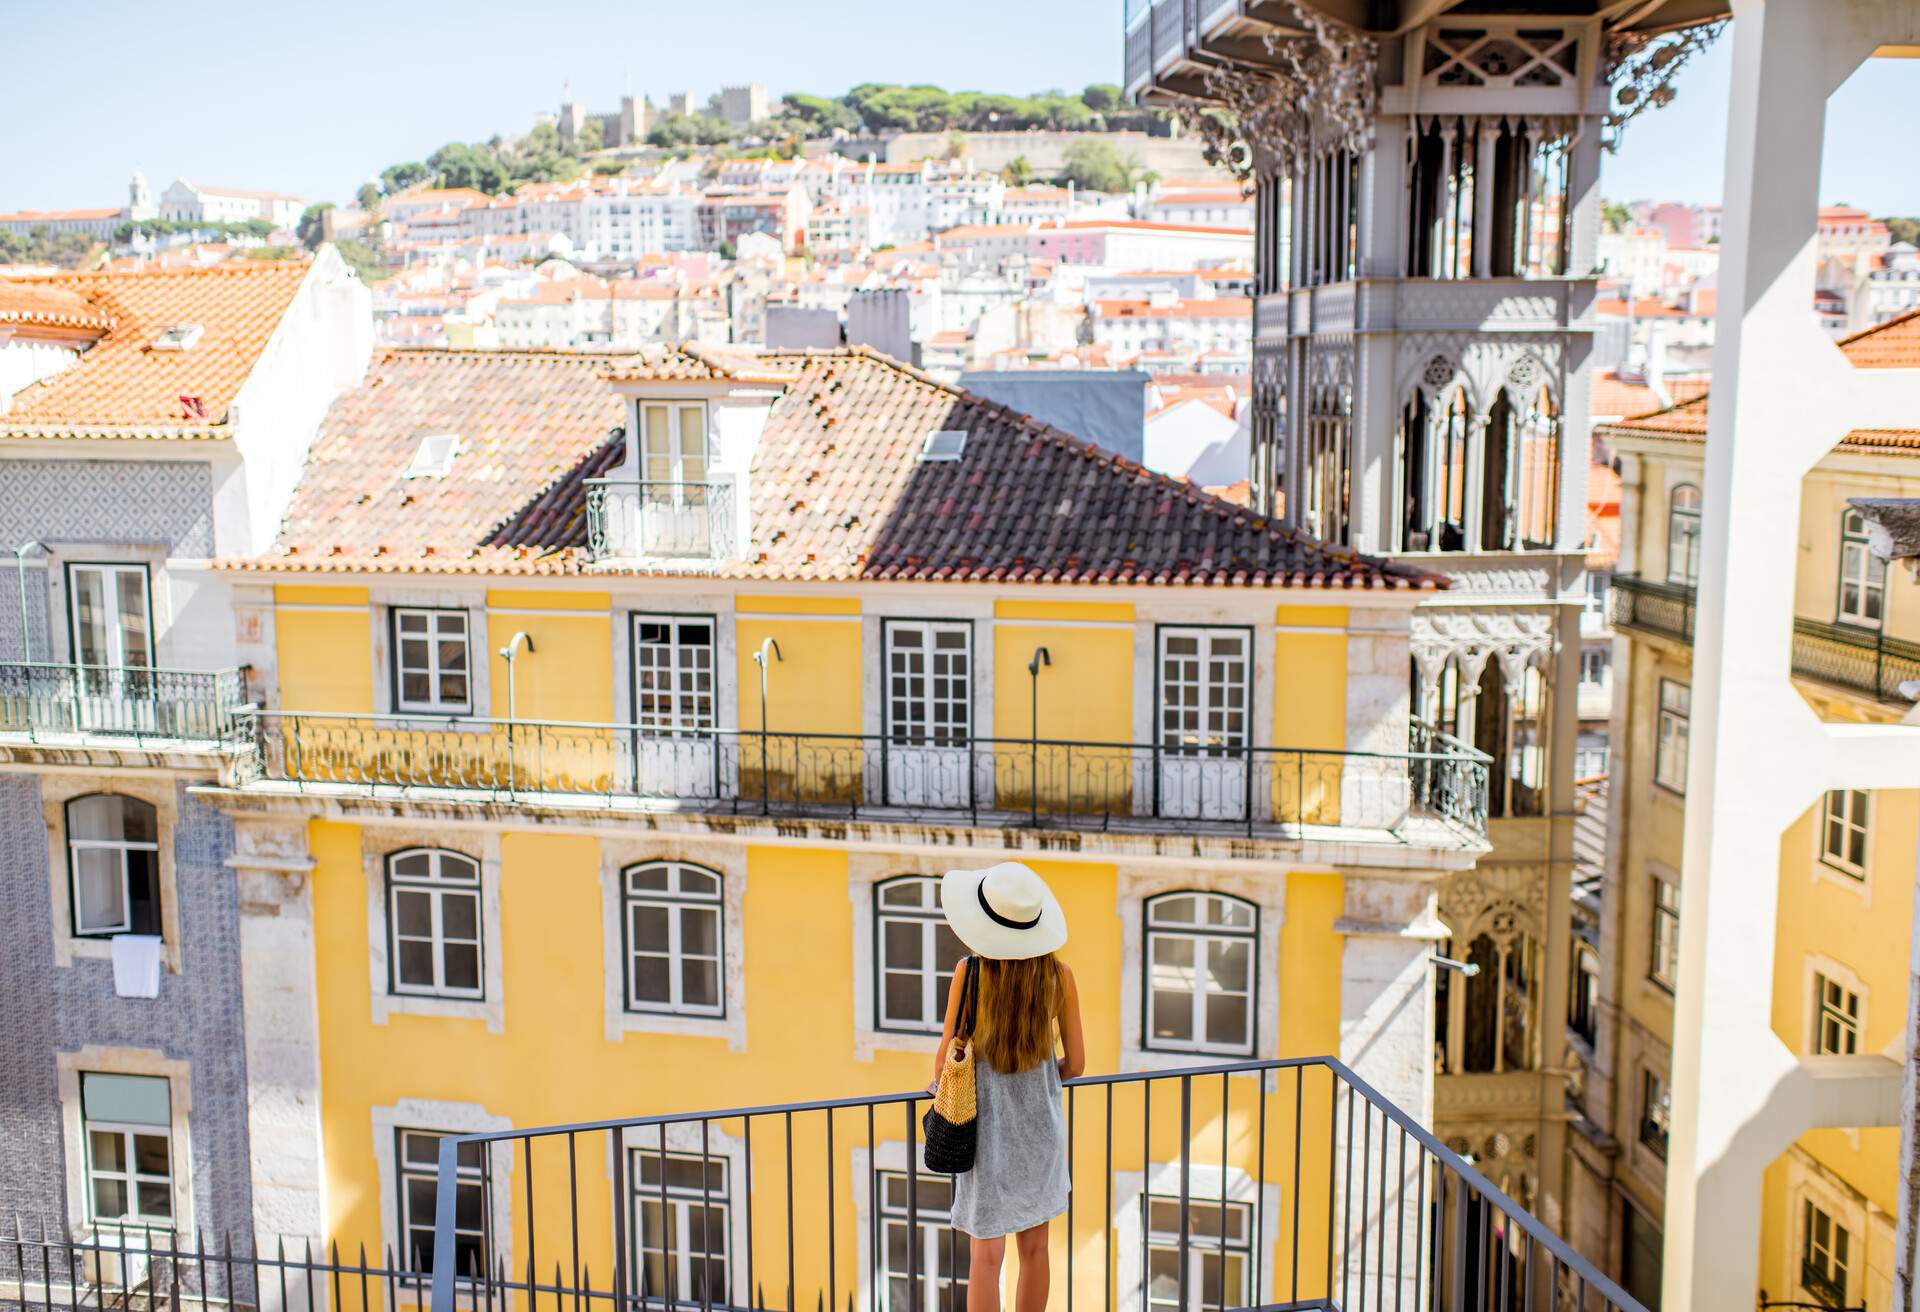 View on the old buildings with famous saint Justa metal lift during the sunny weather in Lisbon city, Portugal; Shutterstock ID 763020433; Purpose: Content; Brand (KAYAK, Momondo, Any): Momondo